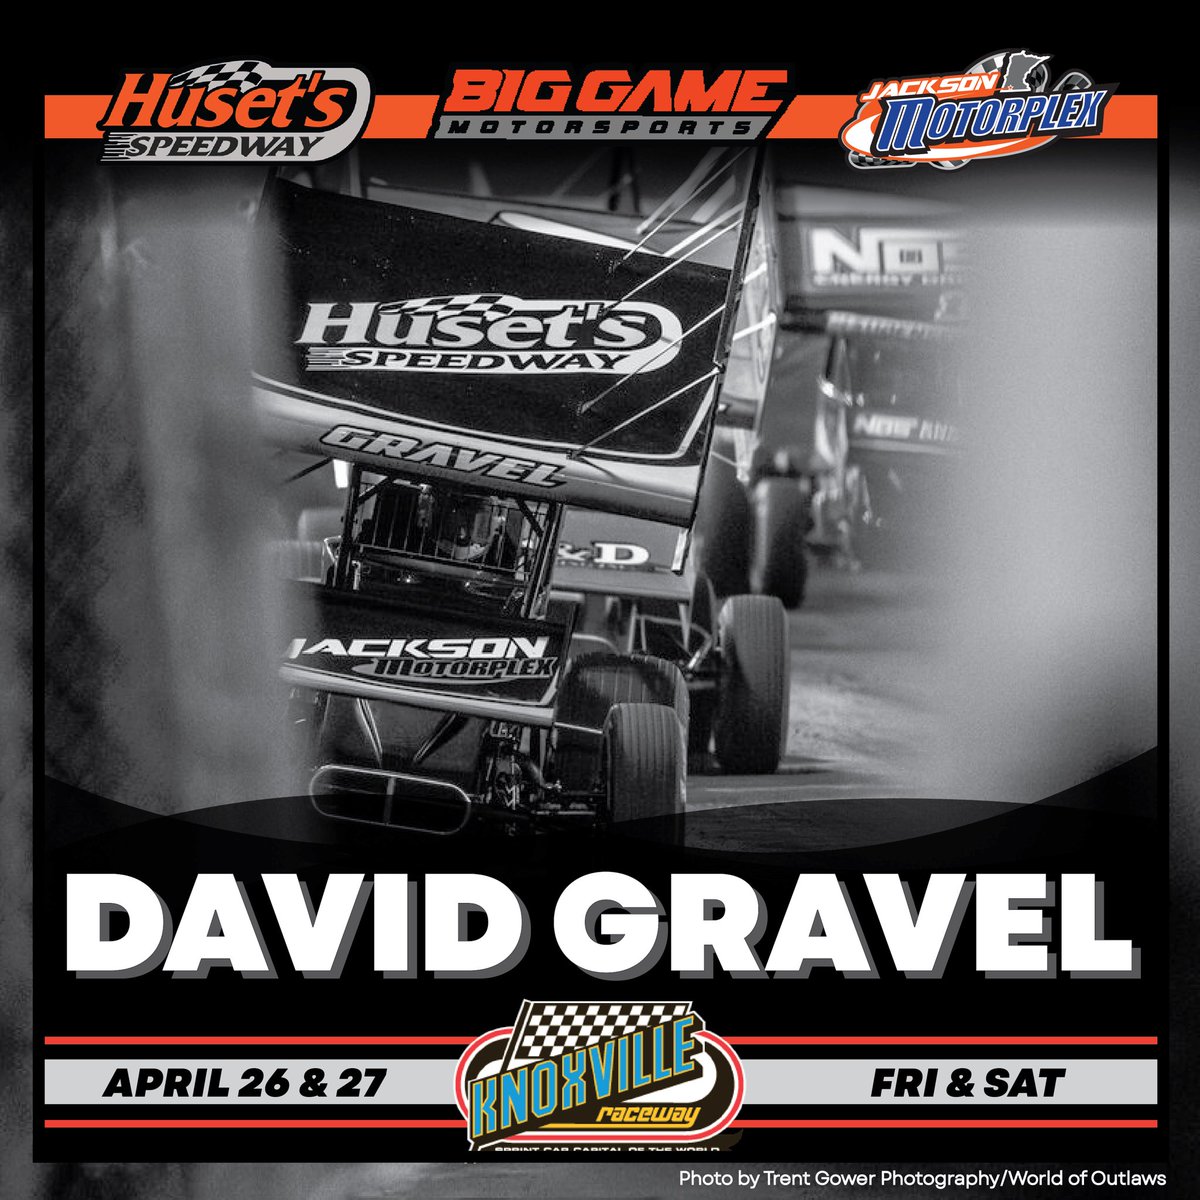 The first trip of the year to @knoxvilleraces is on tap for @BigGameMotorspt driver @DavidGravel, who has officially won a @WorldofOutlaws race at the track during four of the last six years! #TeamILP